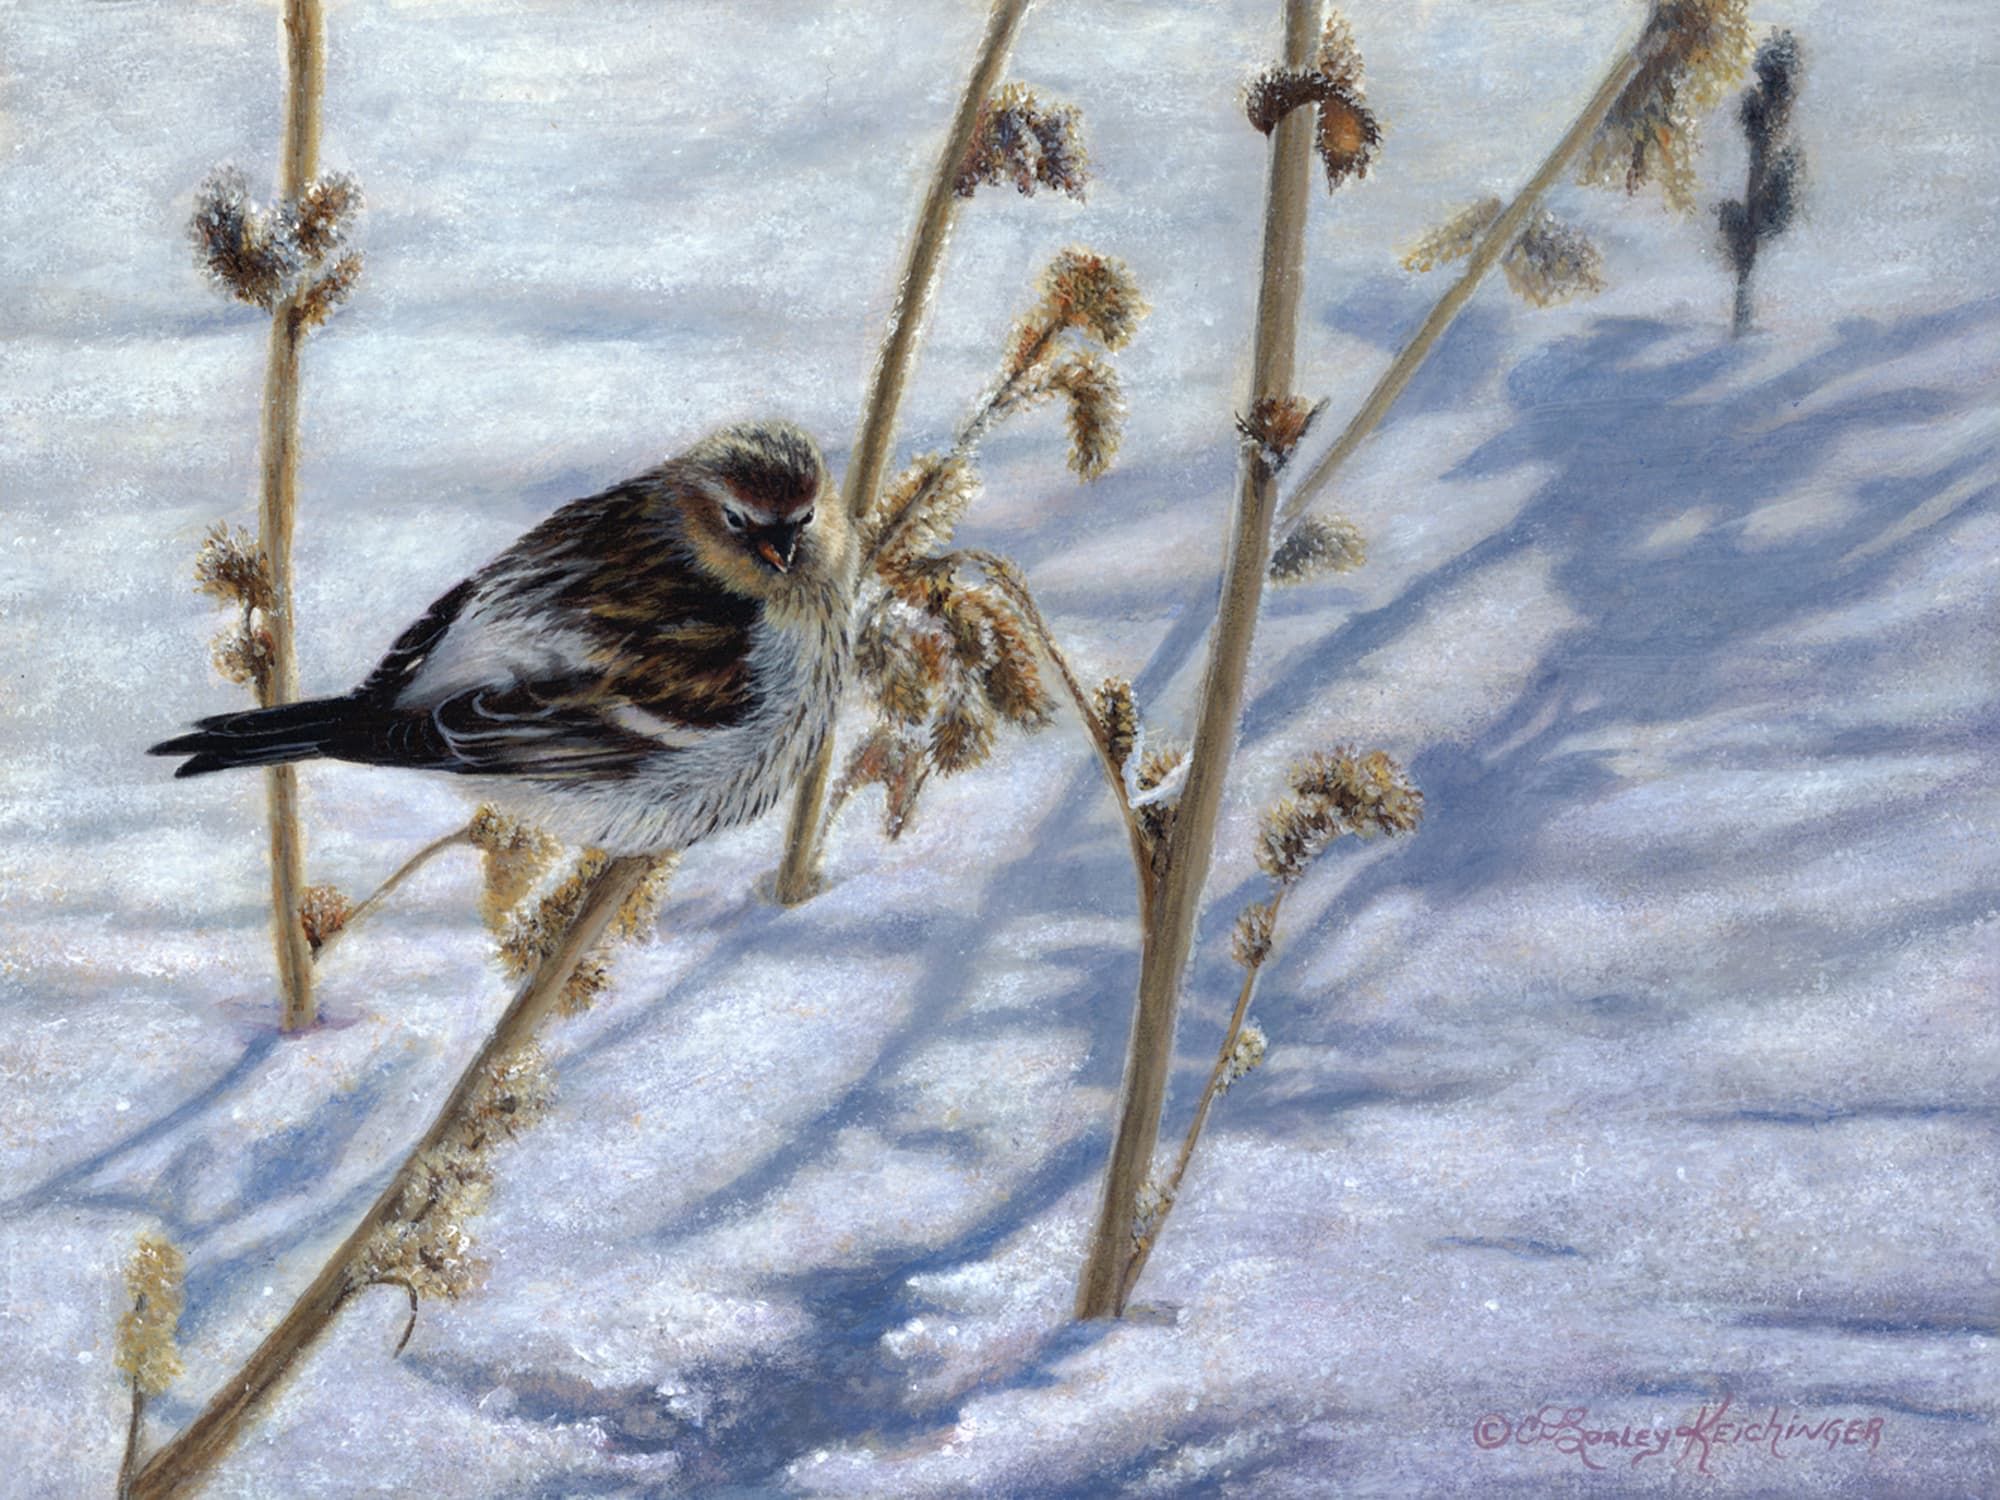 Cindy Sorley-Keichinger, A Touch of Frost, acrylic, 9 x 12.